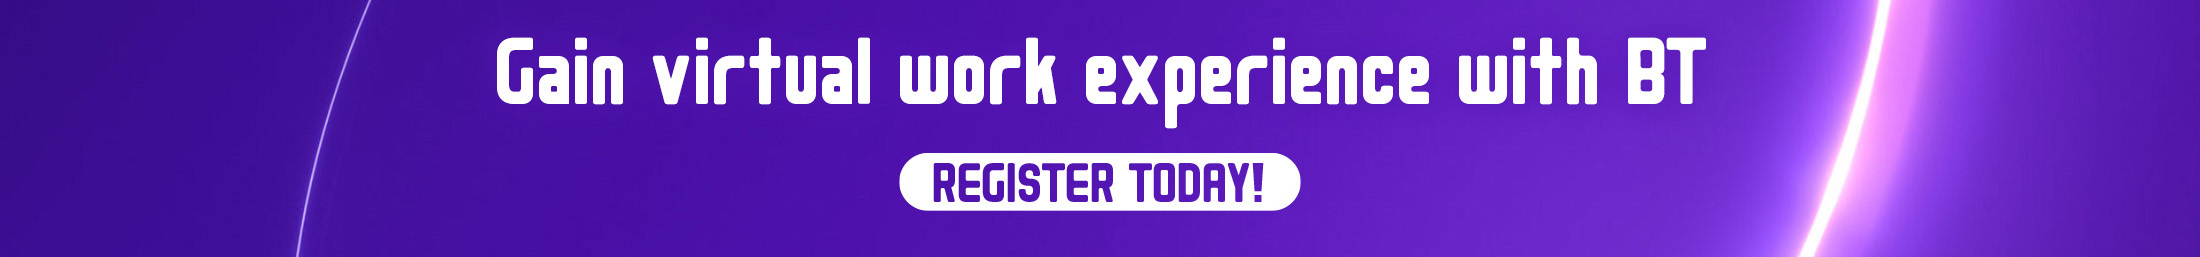 Gain virtual work experience with BT banner